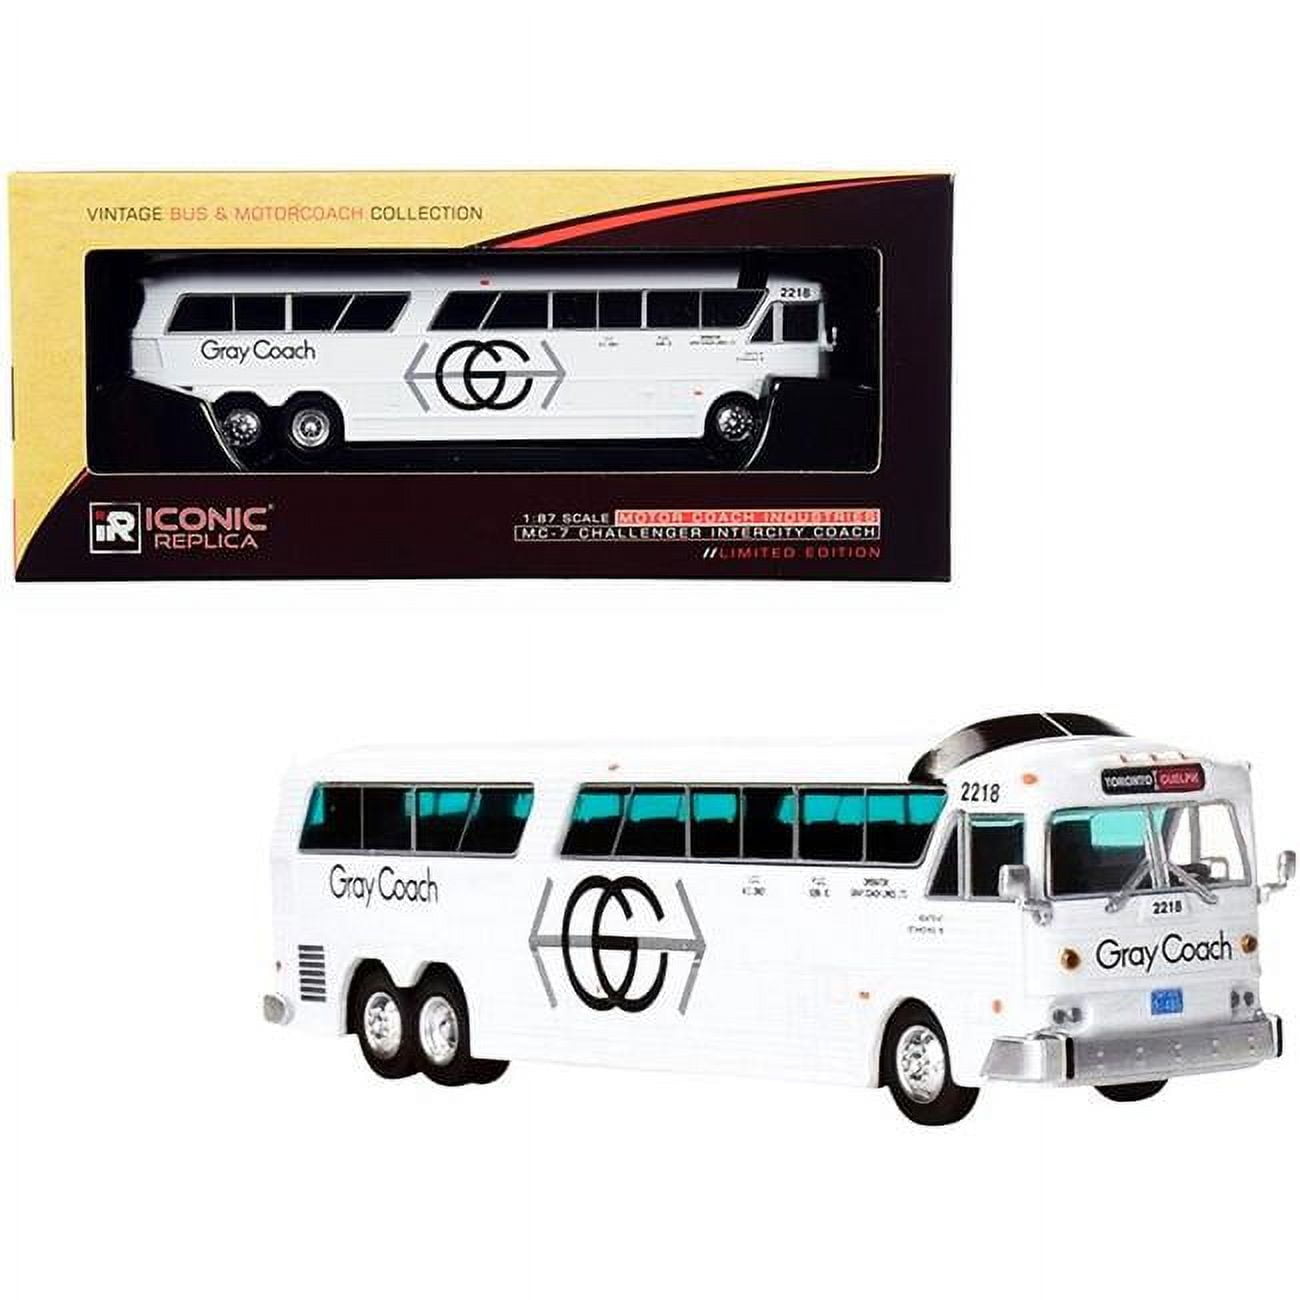 Iconic Replicas 87-0270 1-87 HO Diecast Model for MCI MC-7 Challenger Intercity Coach Bus White Gray Coach Toronto - Guelph Vintage Bus & Motorc